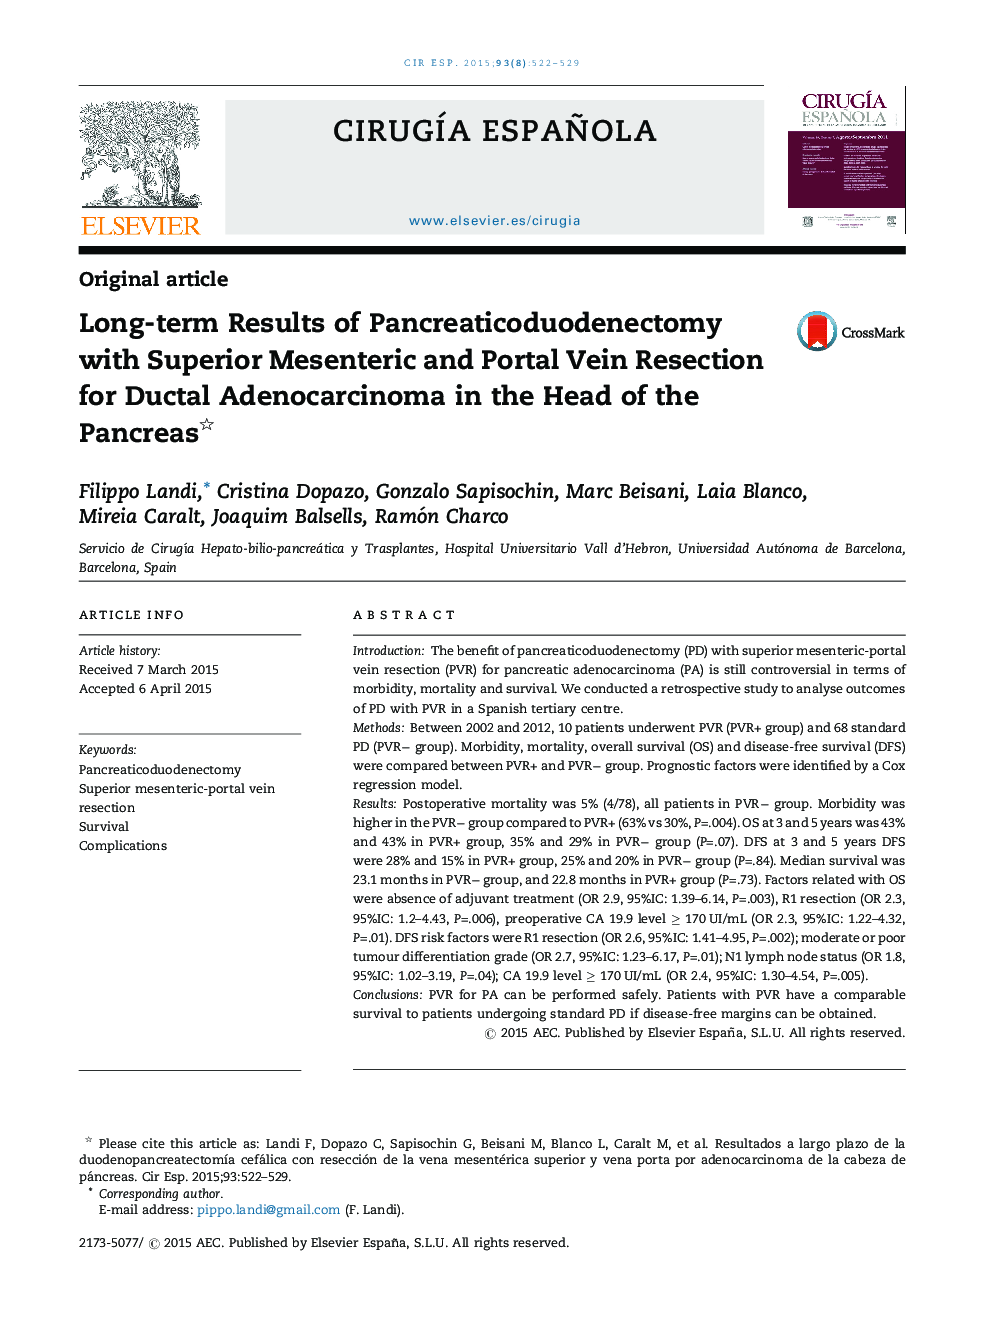 Long-term Results of Pancreaticoduodenectomy with Superior Mesenteric and Portal Vein Resection for Ductal Adenocarcinoma in the Head of the Pancreas 